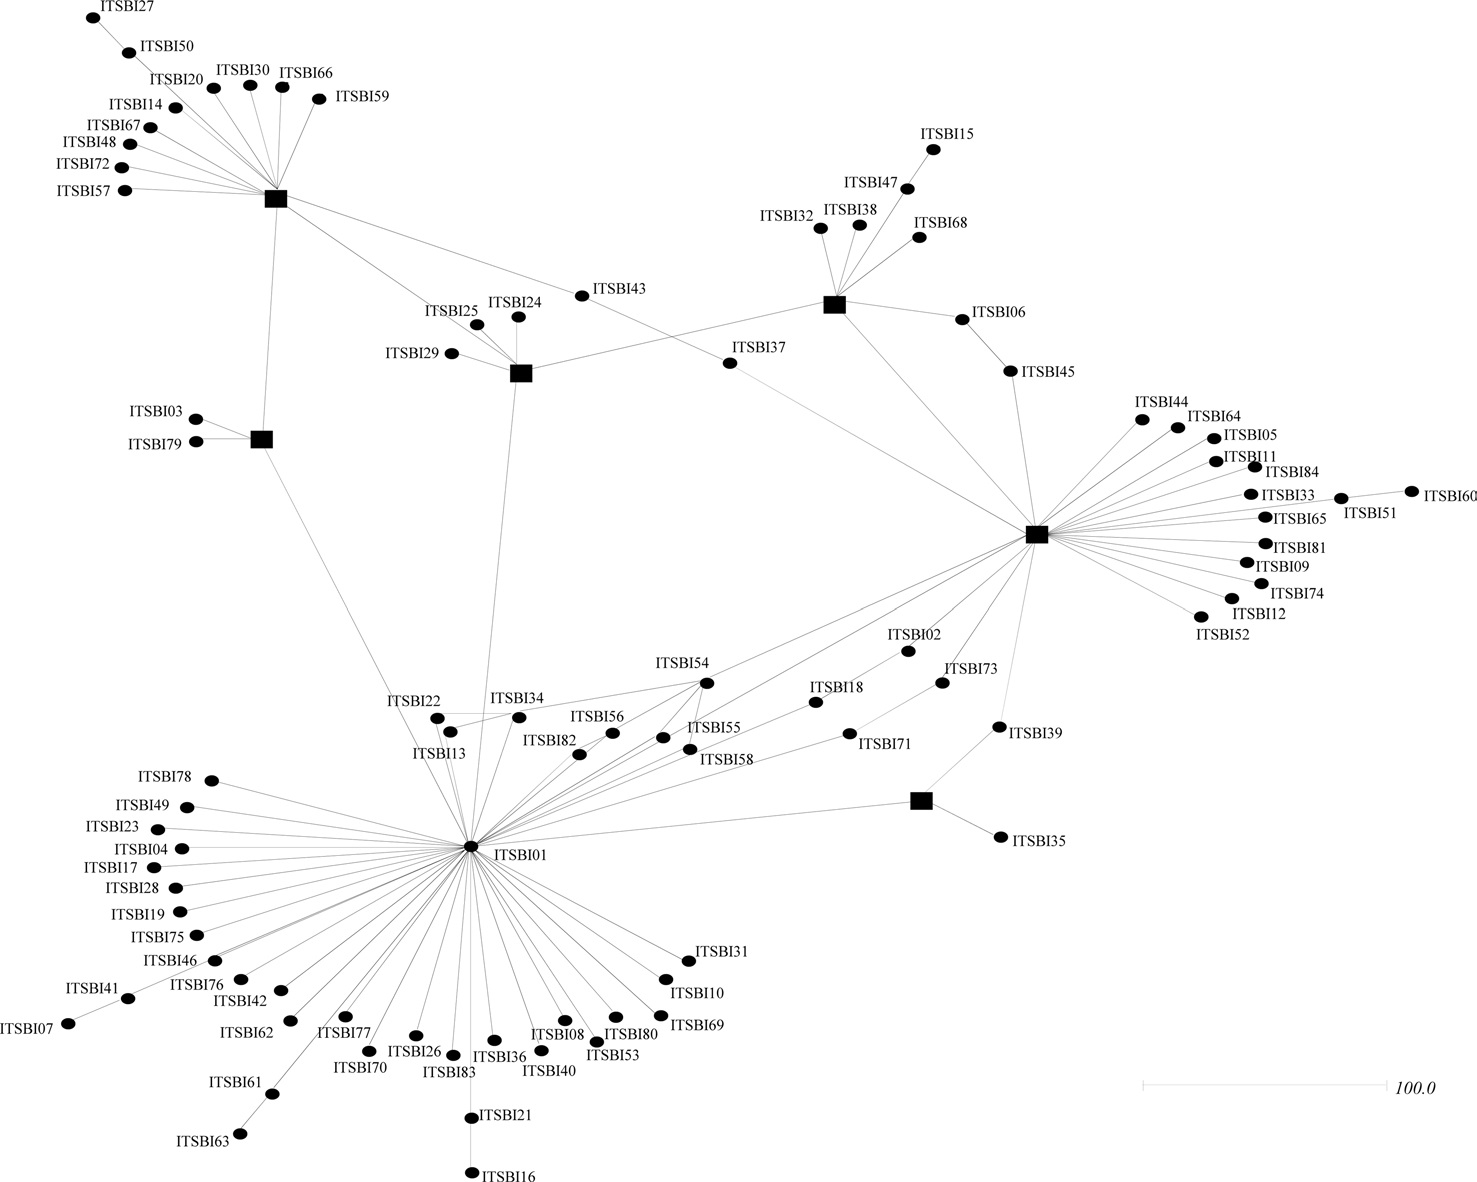 Median-Joining networks indicating the relationship among 84 ITS2 sequence types. The branch lengths represent the amount of
character-state changes occurring on that branch. Circular dots represent sequence types found in this study, whereas rectangles indicate the
hypothetical ones that were not found in this study.